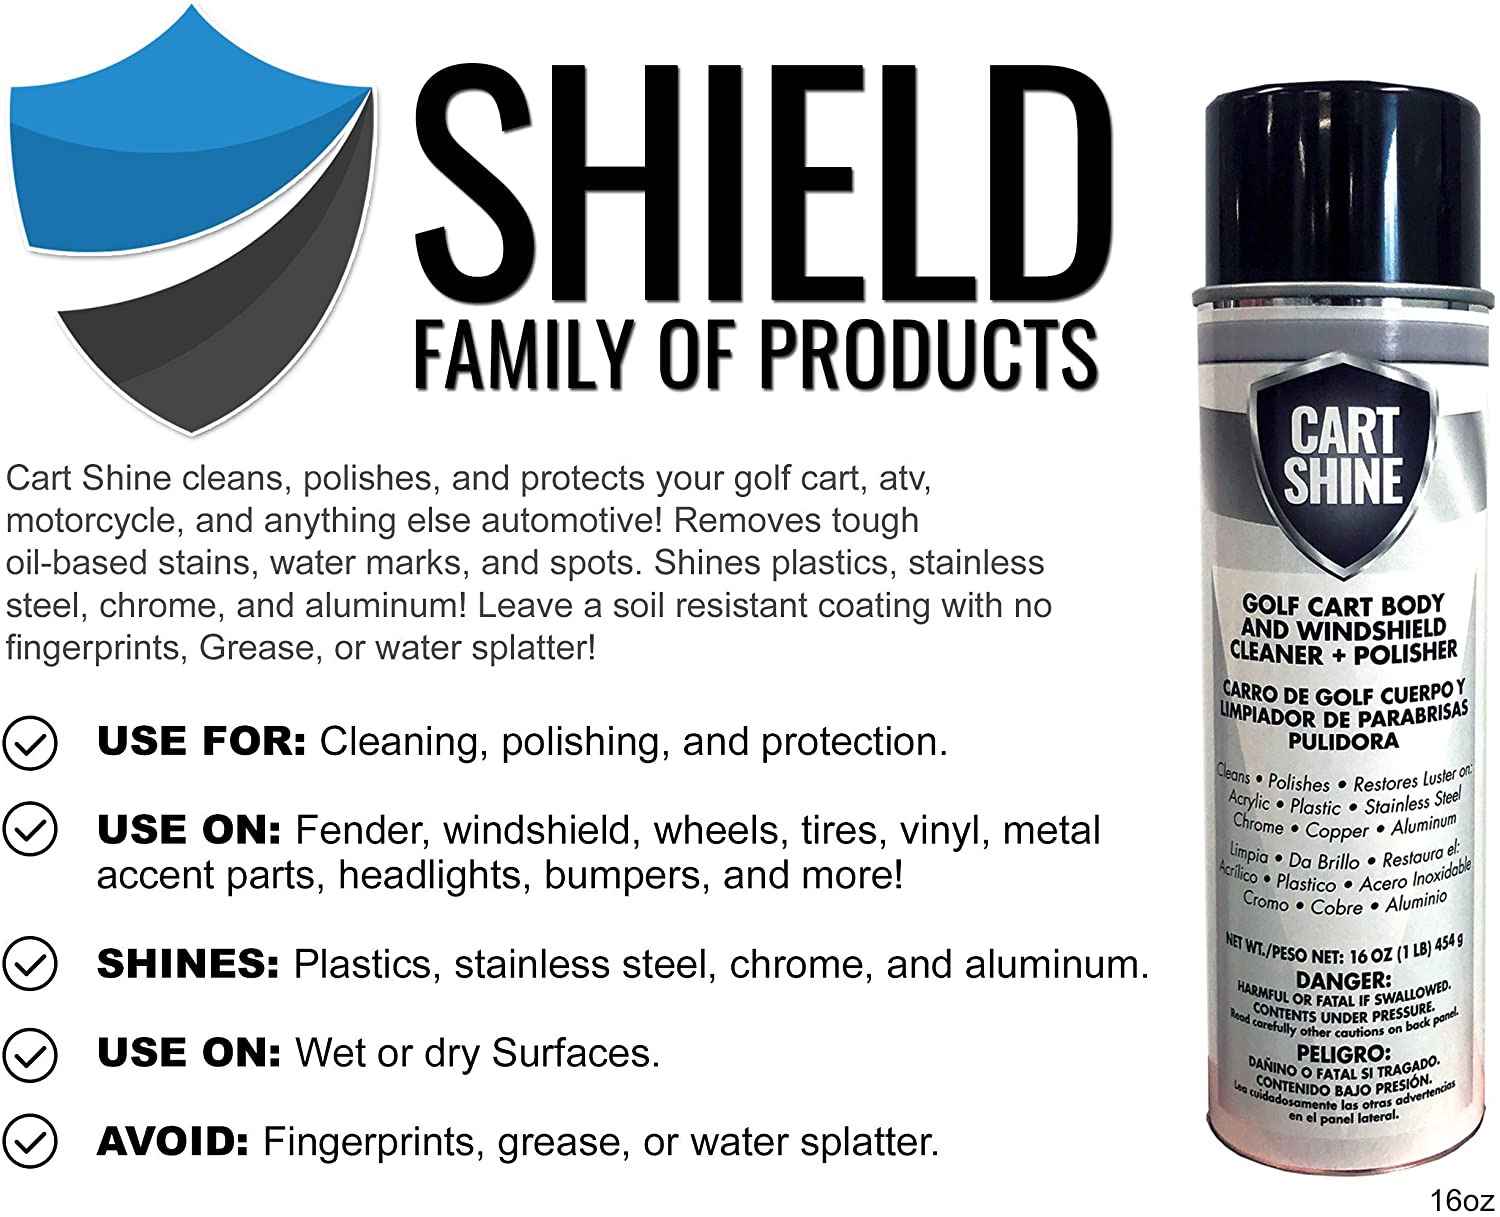 The Shield Family of Products